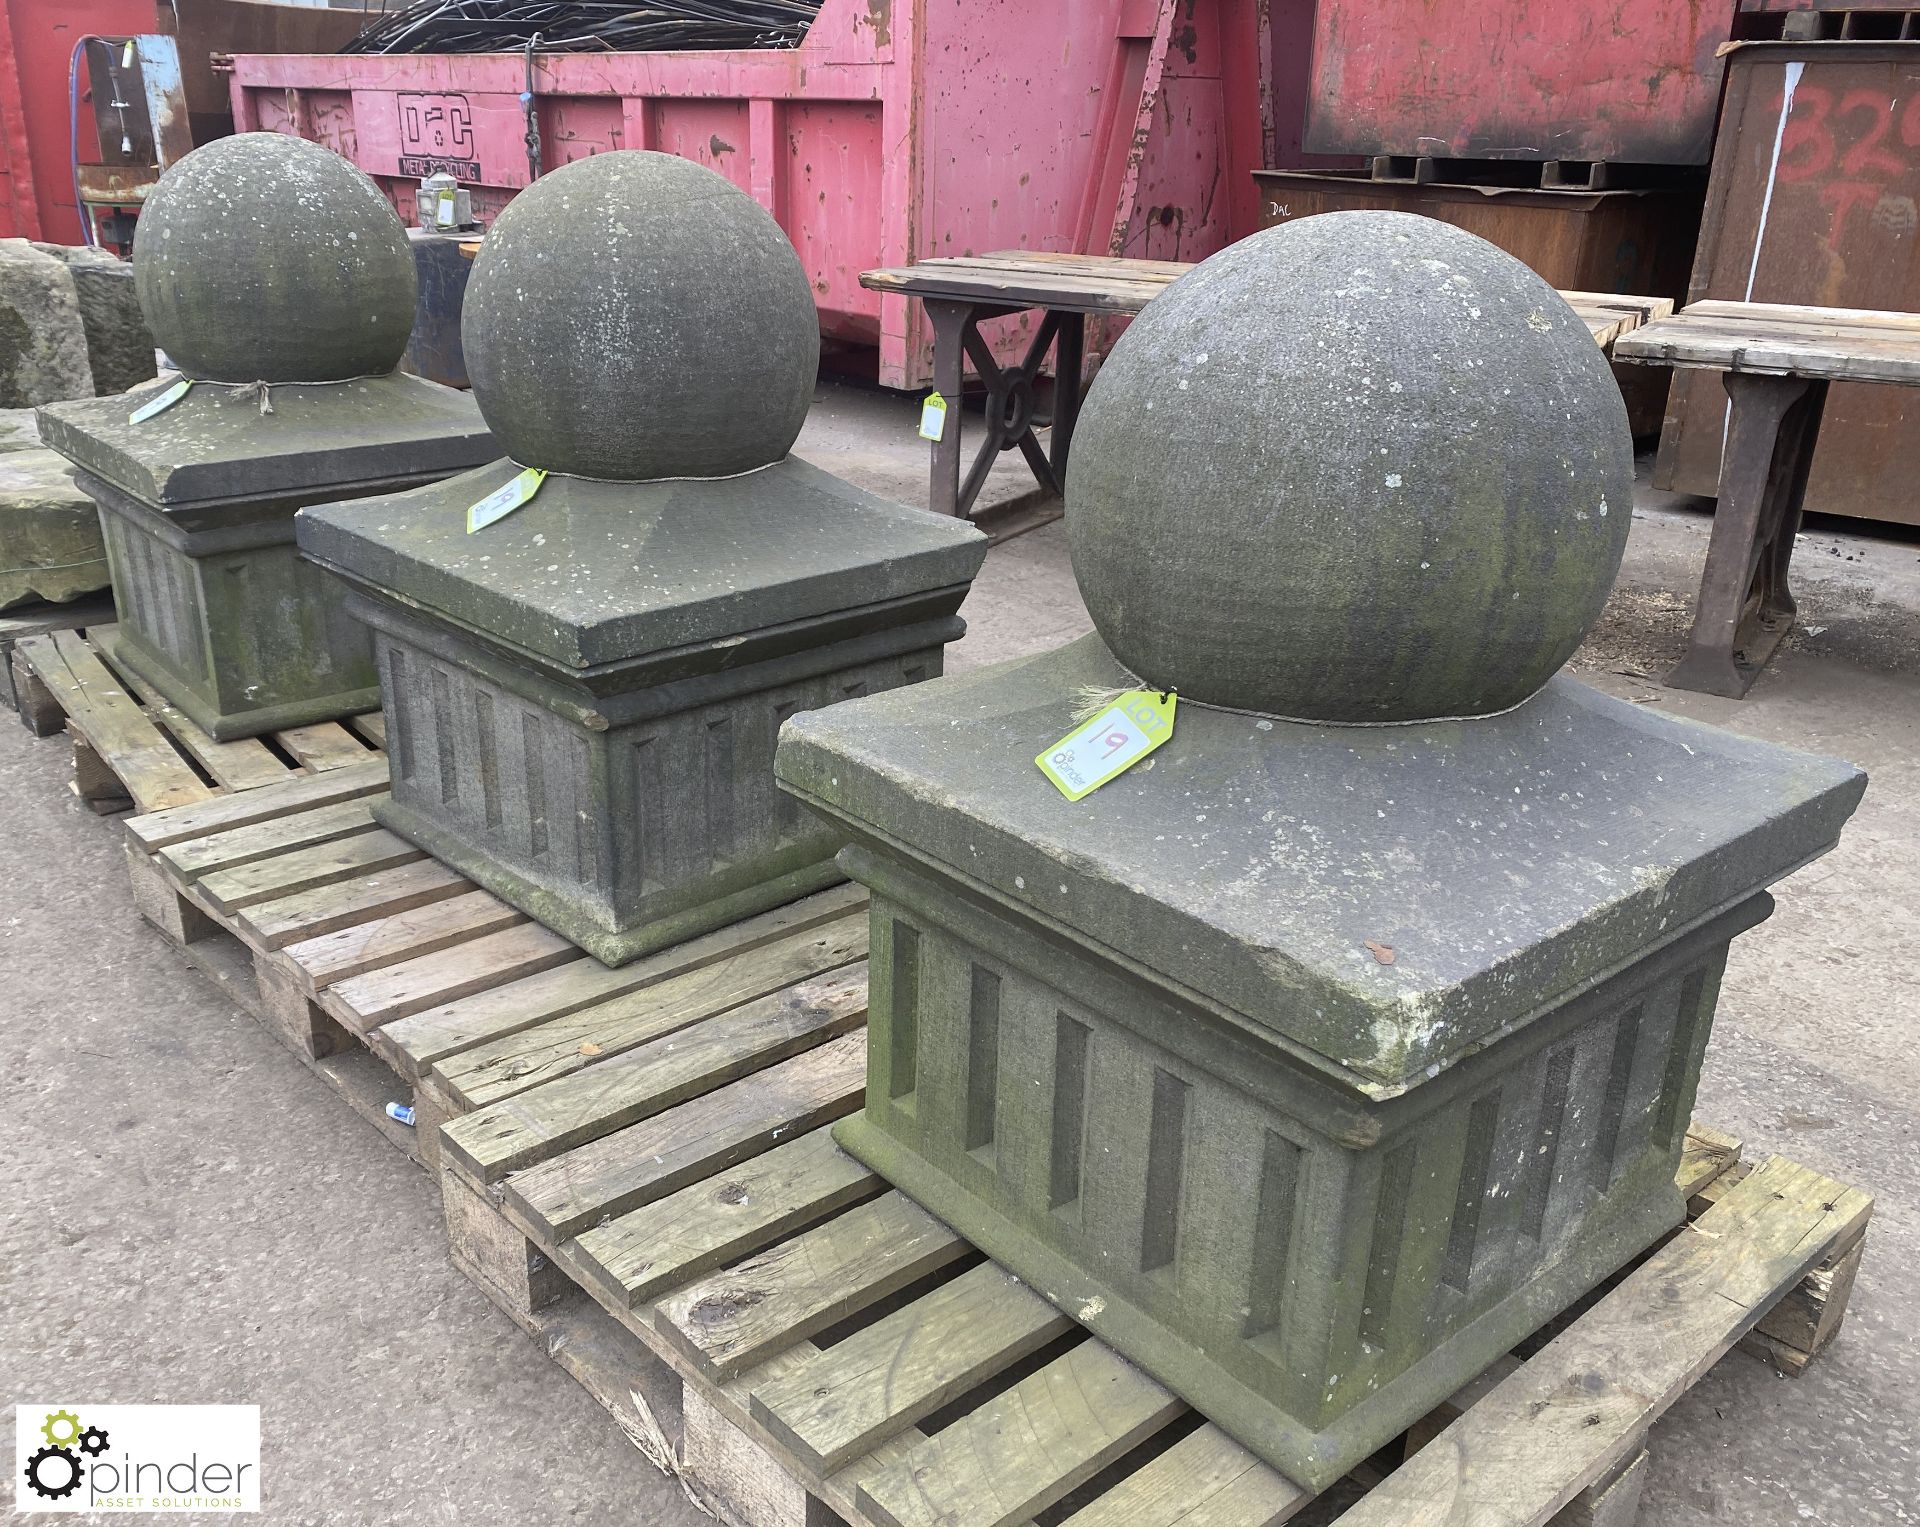 Set 3 Yorkshire stone Gate Post Pier Caps, with ball top, base 600mm x 600mm, 900mm tall - Image 3 of 11